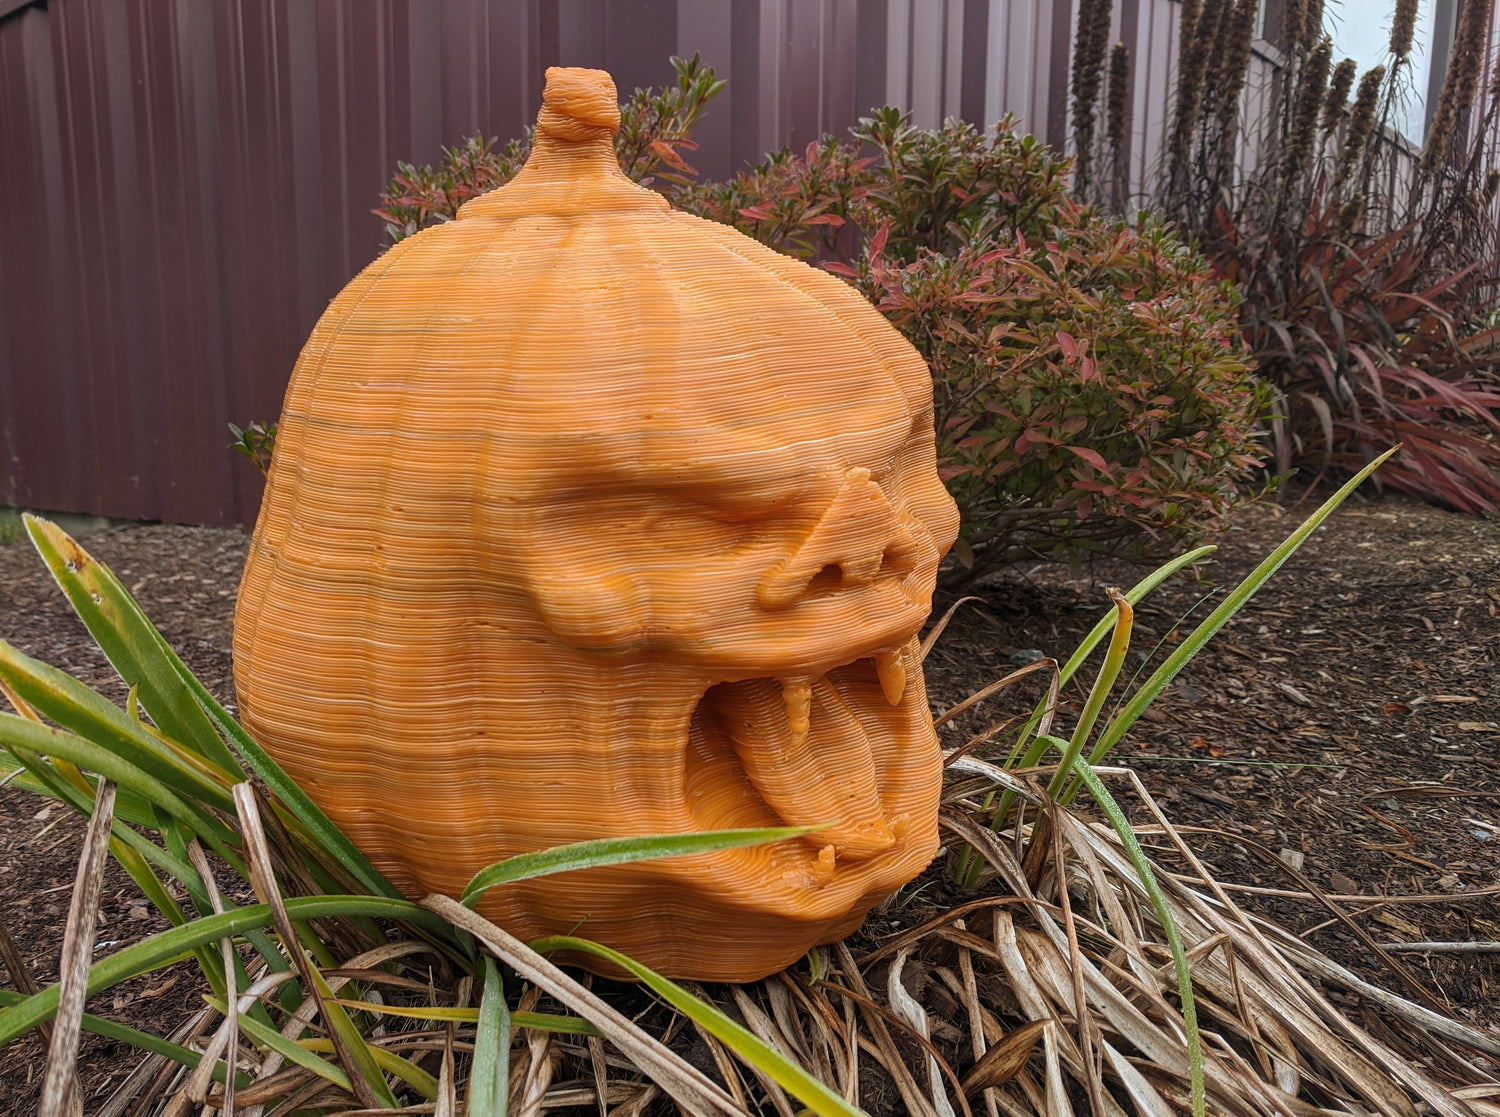 Spooky 3D Printed Pumpkin - Happy Halloween from the team at Filabot!